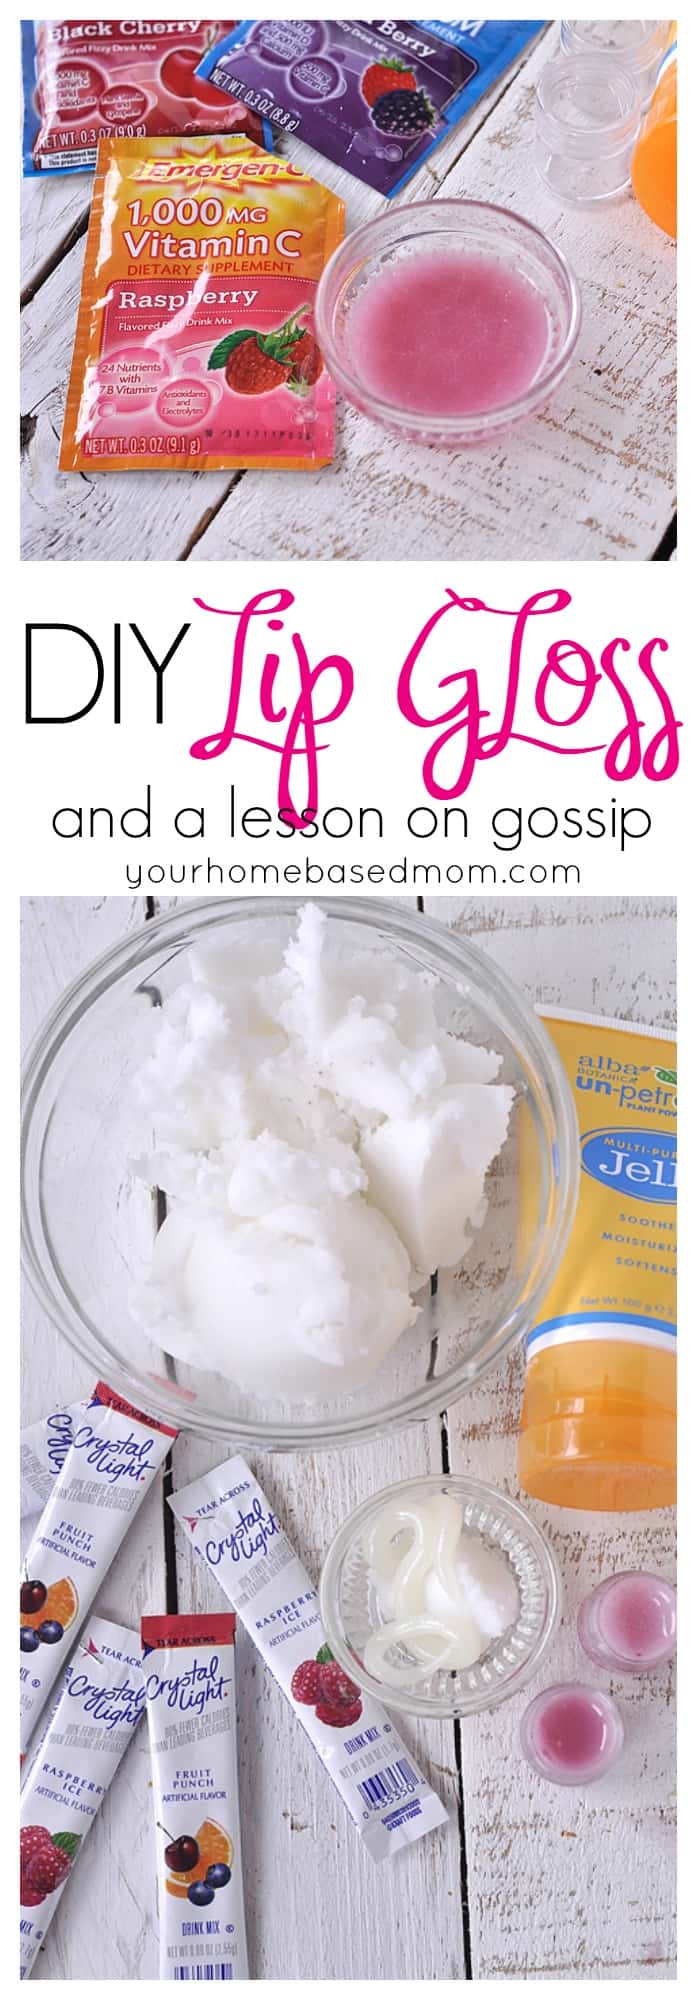 Make your own lip gloss with this easy step by step tutorial @yourhomebasedmom.com